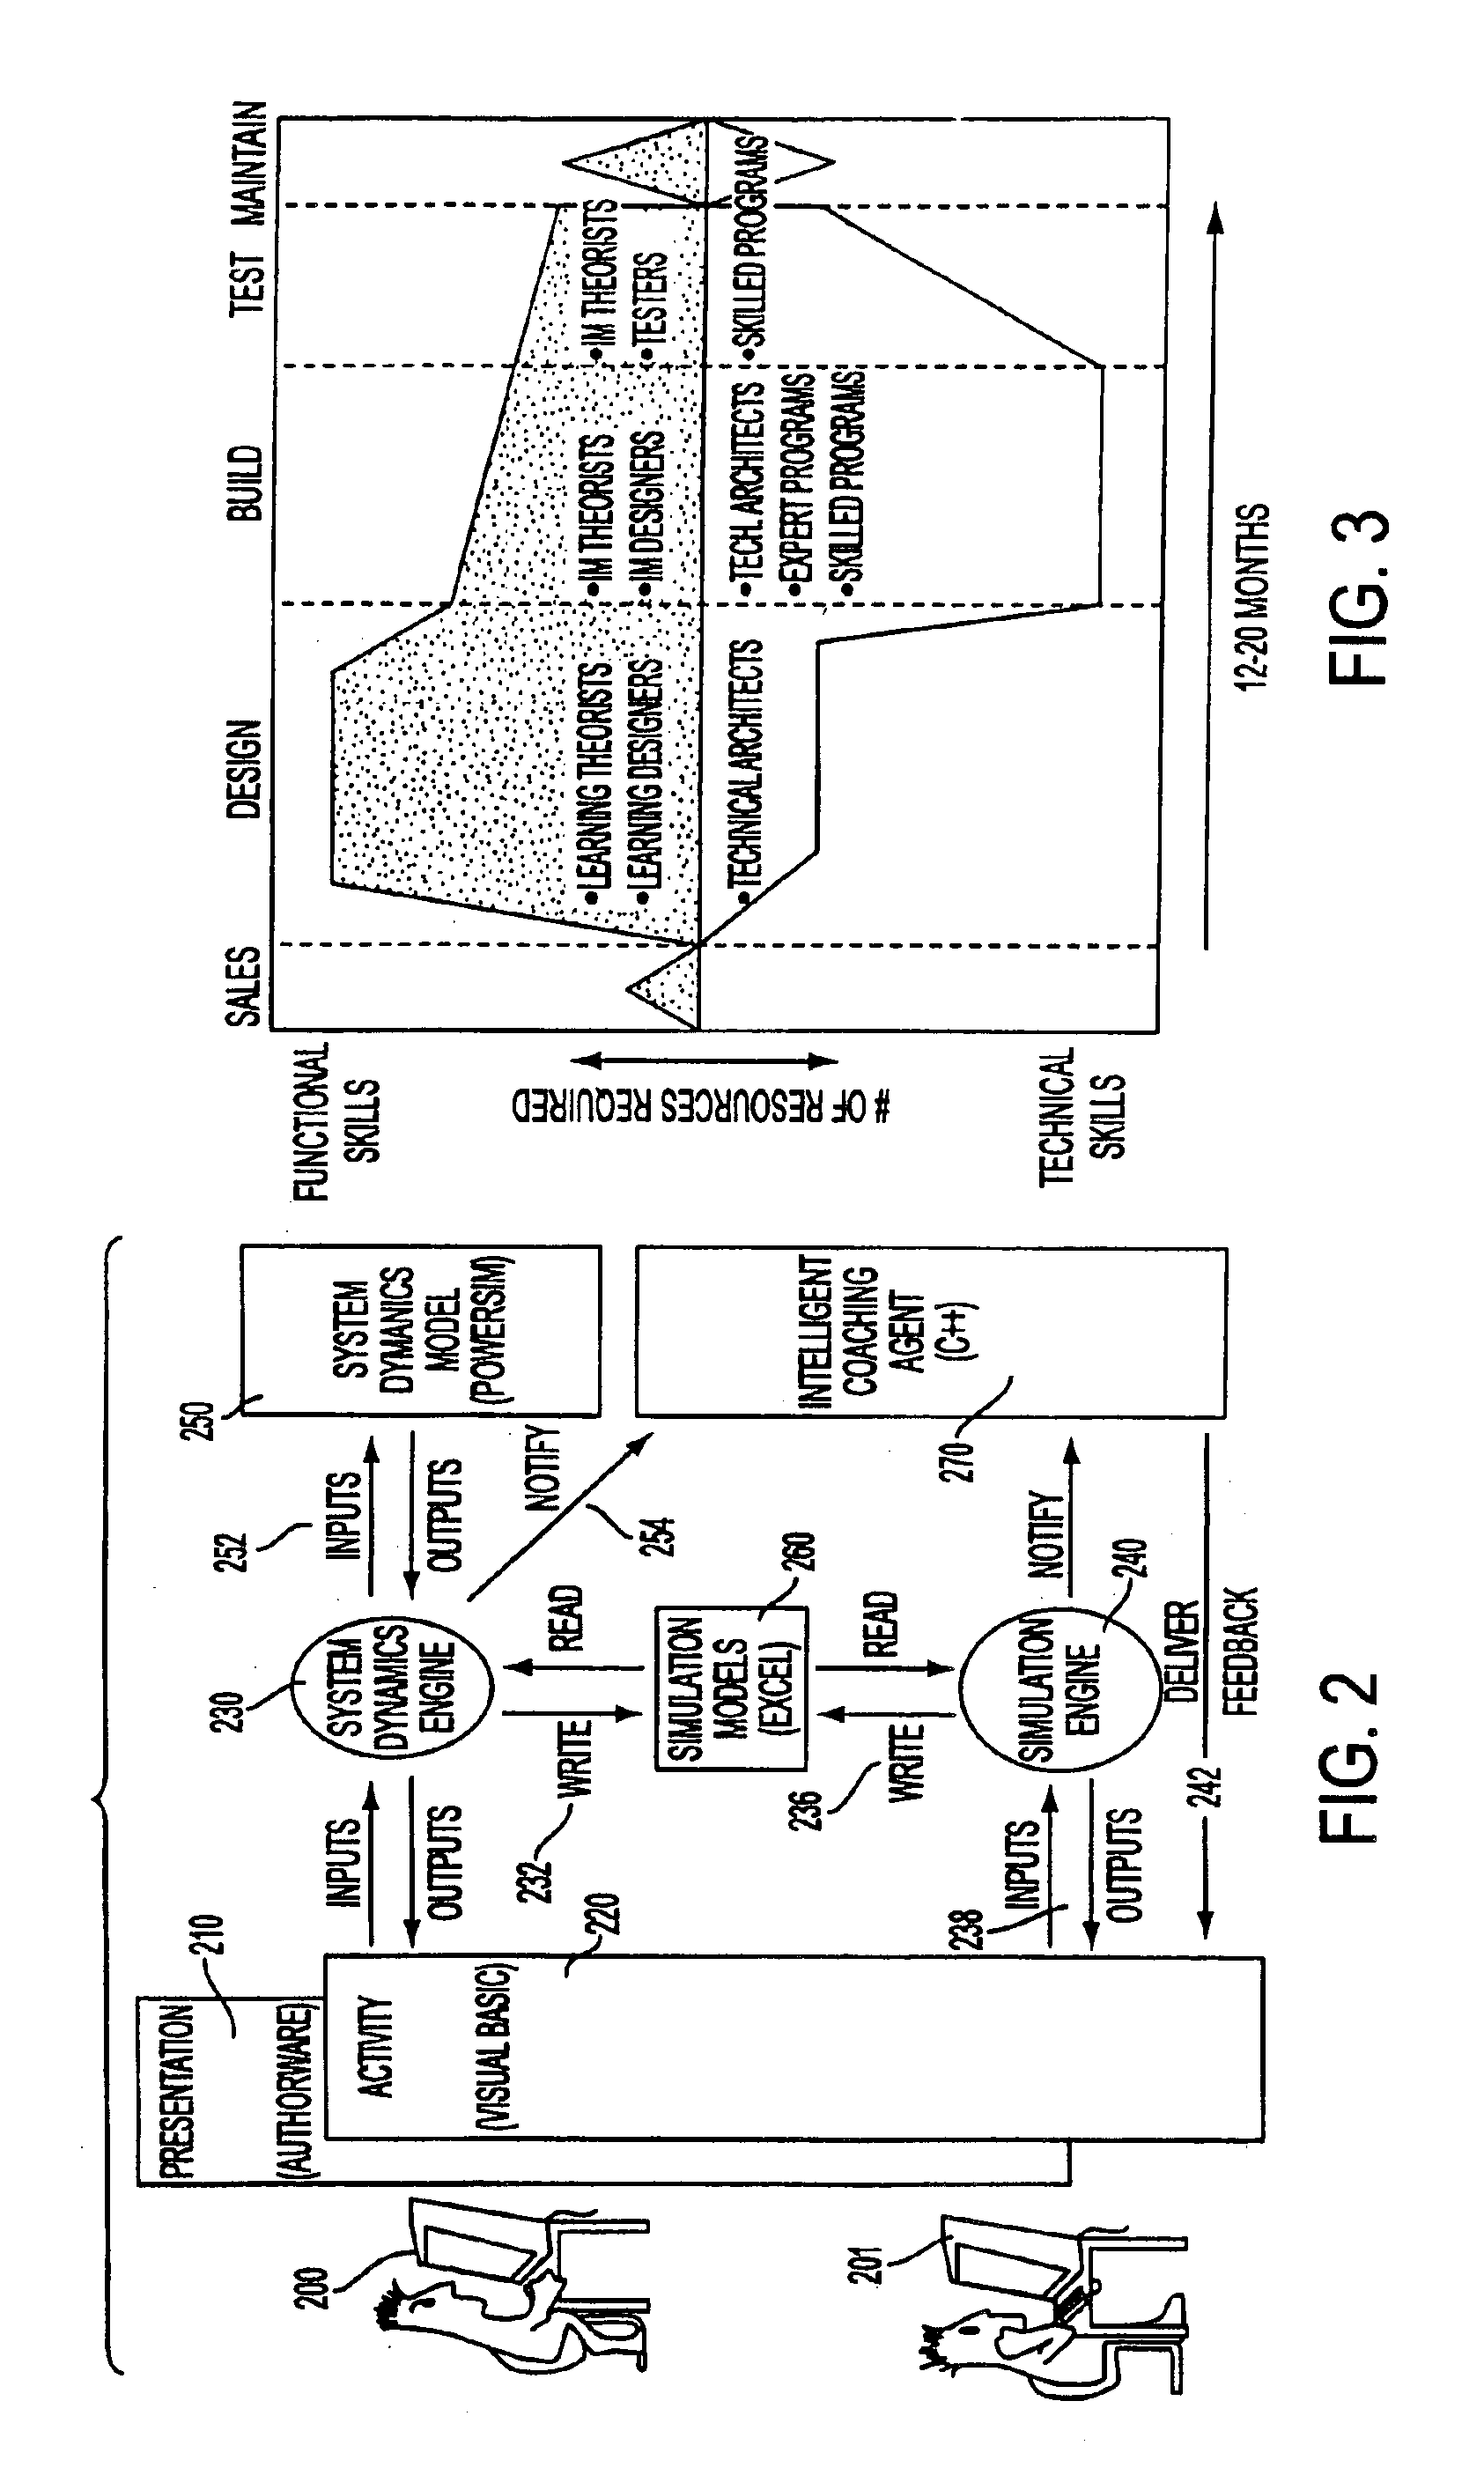 Goal based educational system with support for dynamic characteristic tuning